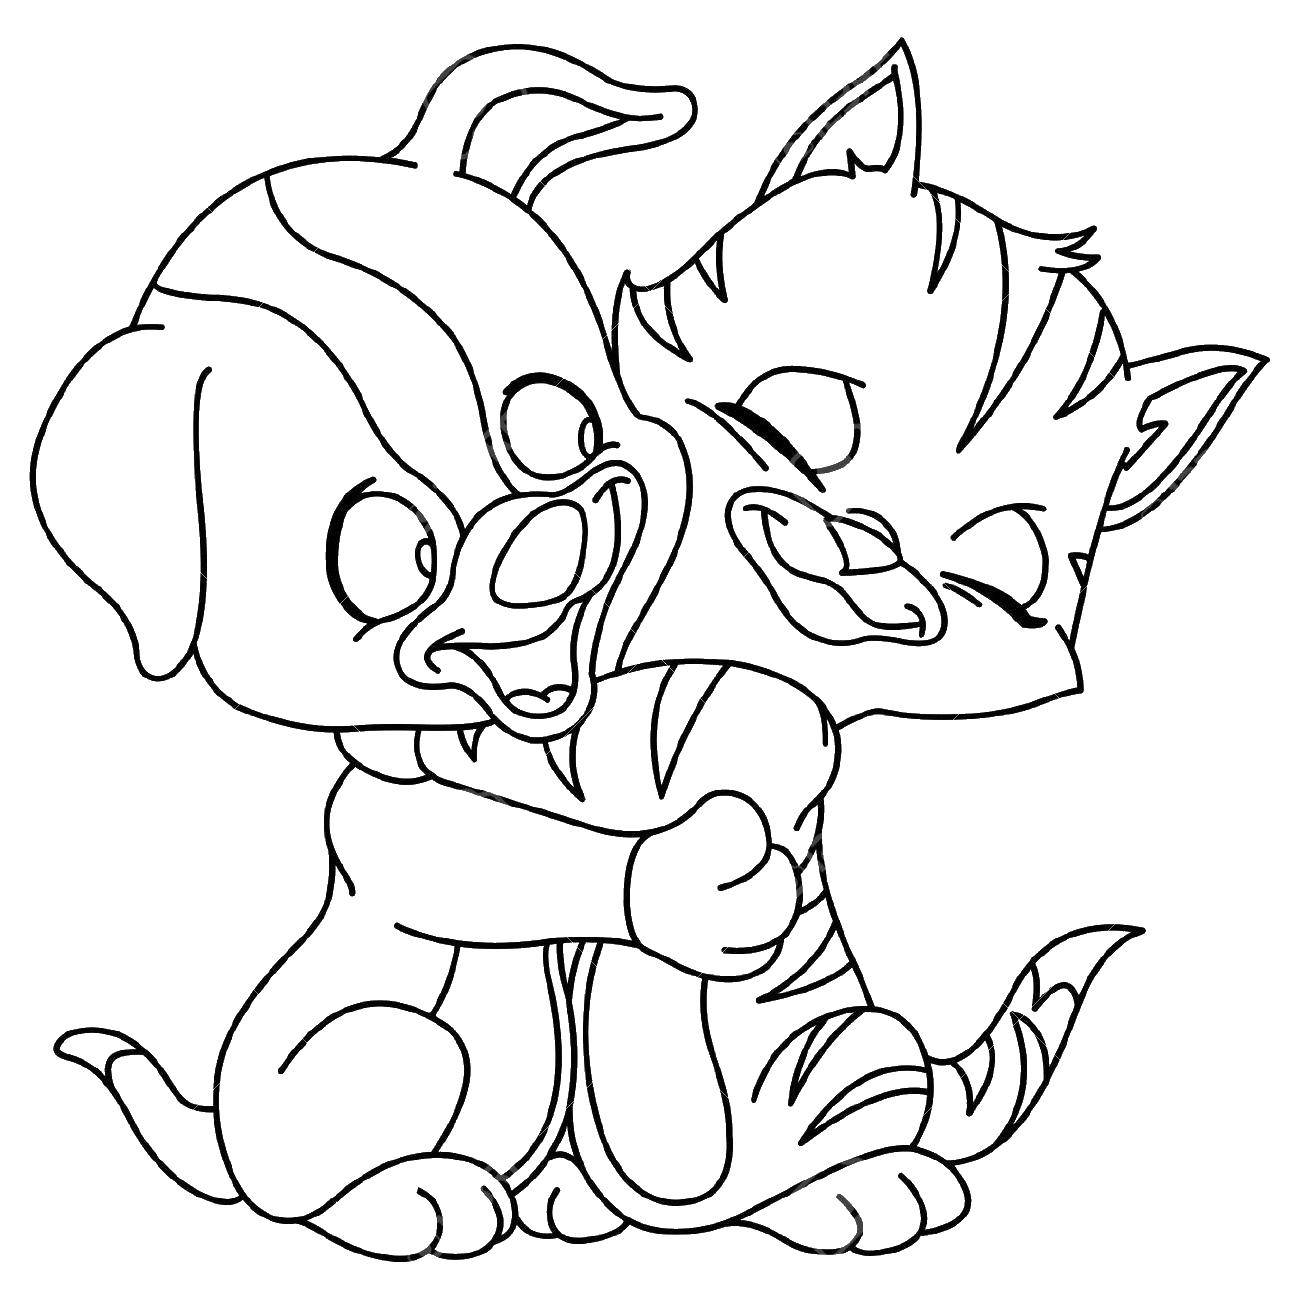 Coloring The dog and cat cuddling. Category Cats and kittens. Tags:  cat, dog. hugs.